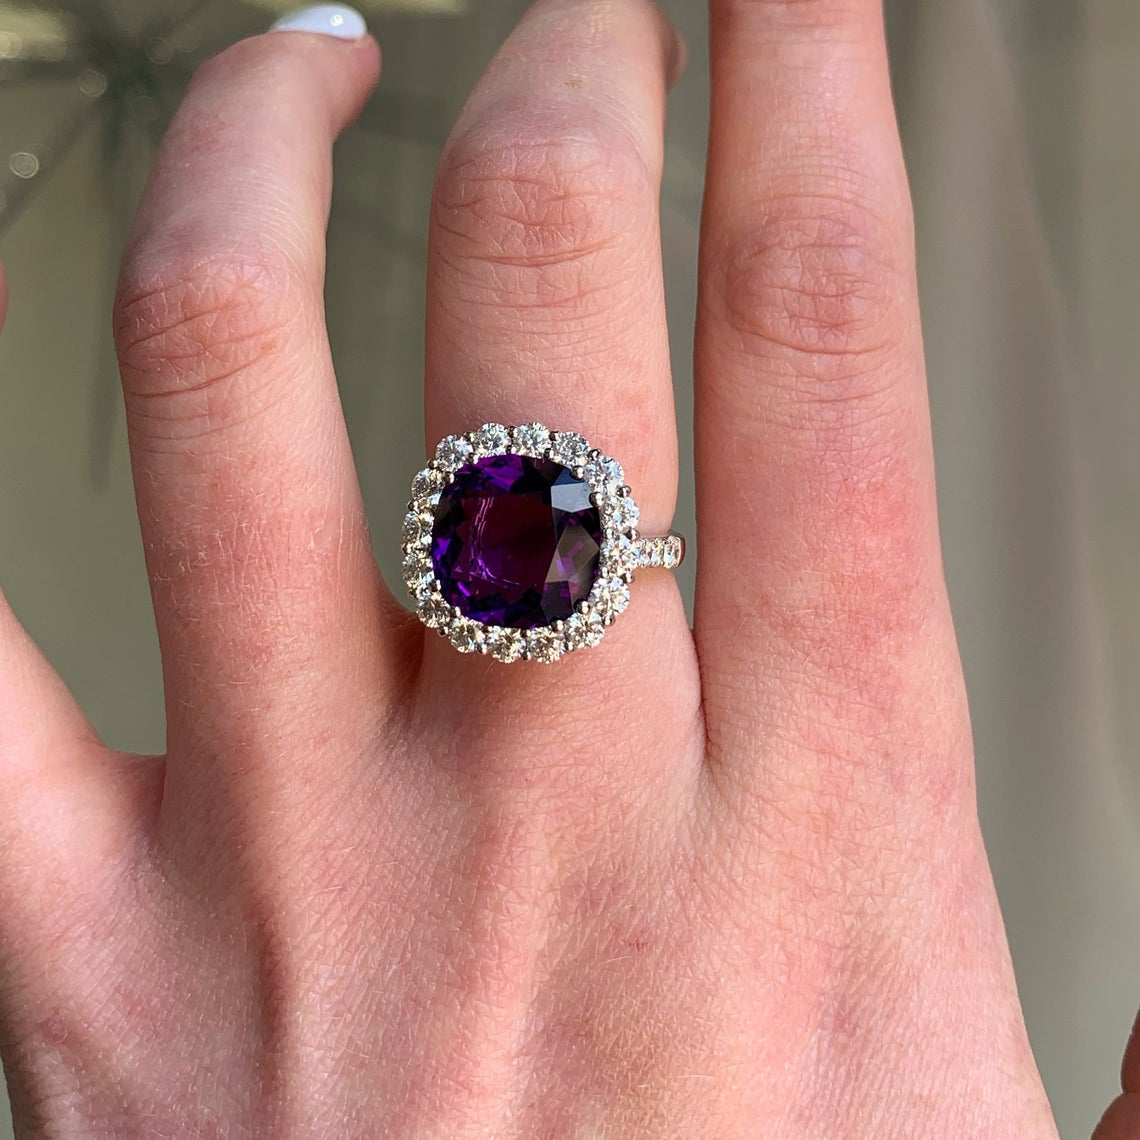 Spectacular 18ct White Gold Amethyst and Diamond Ring – SIZE N 1/2